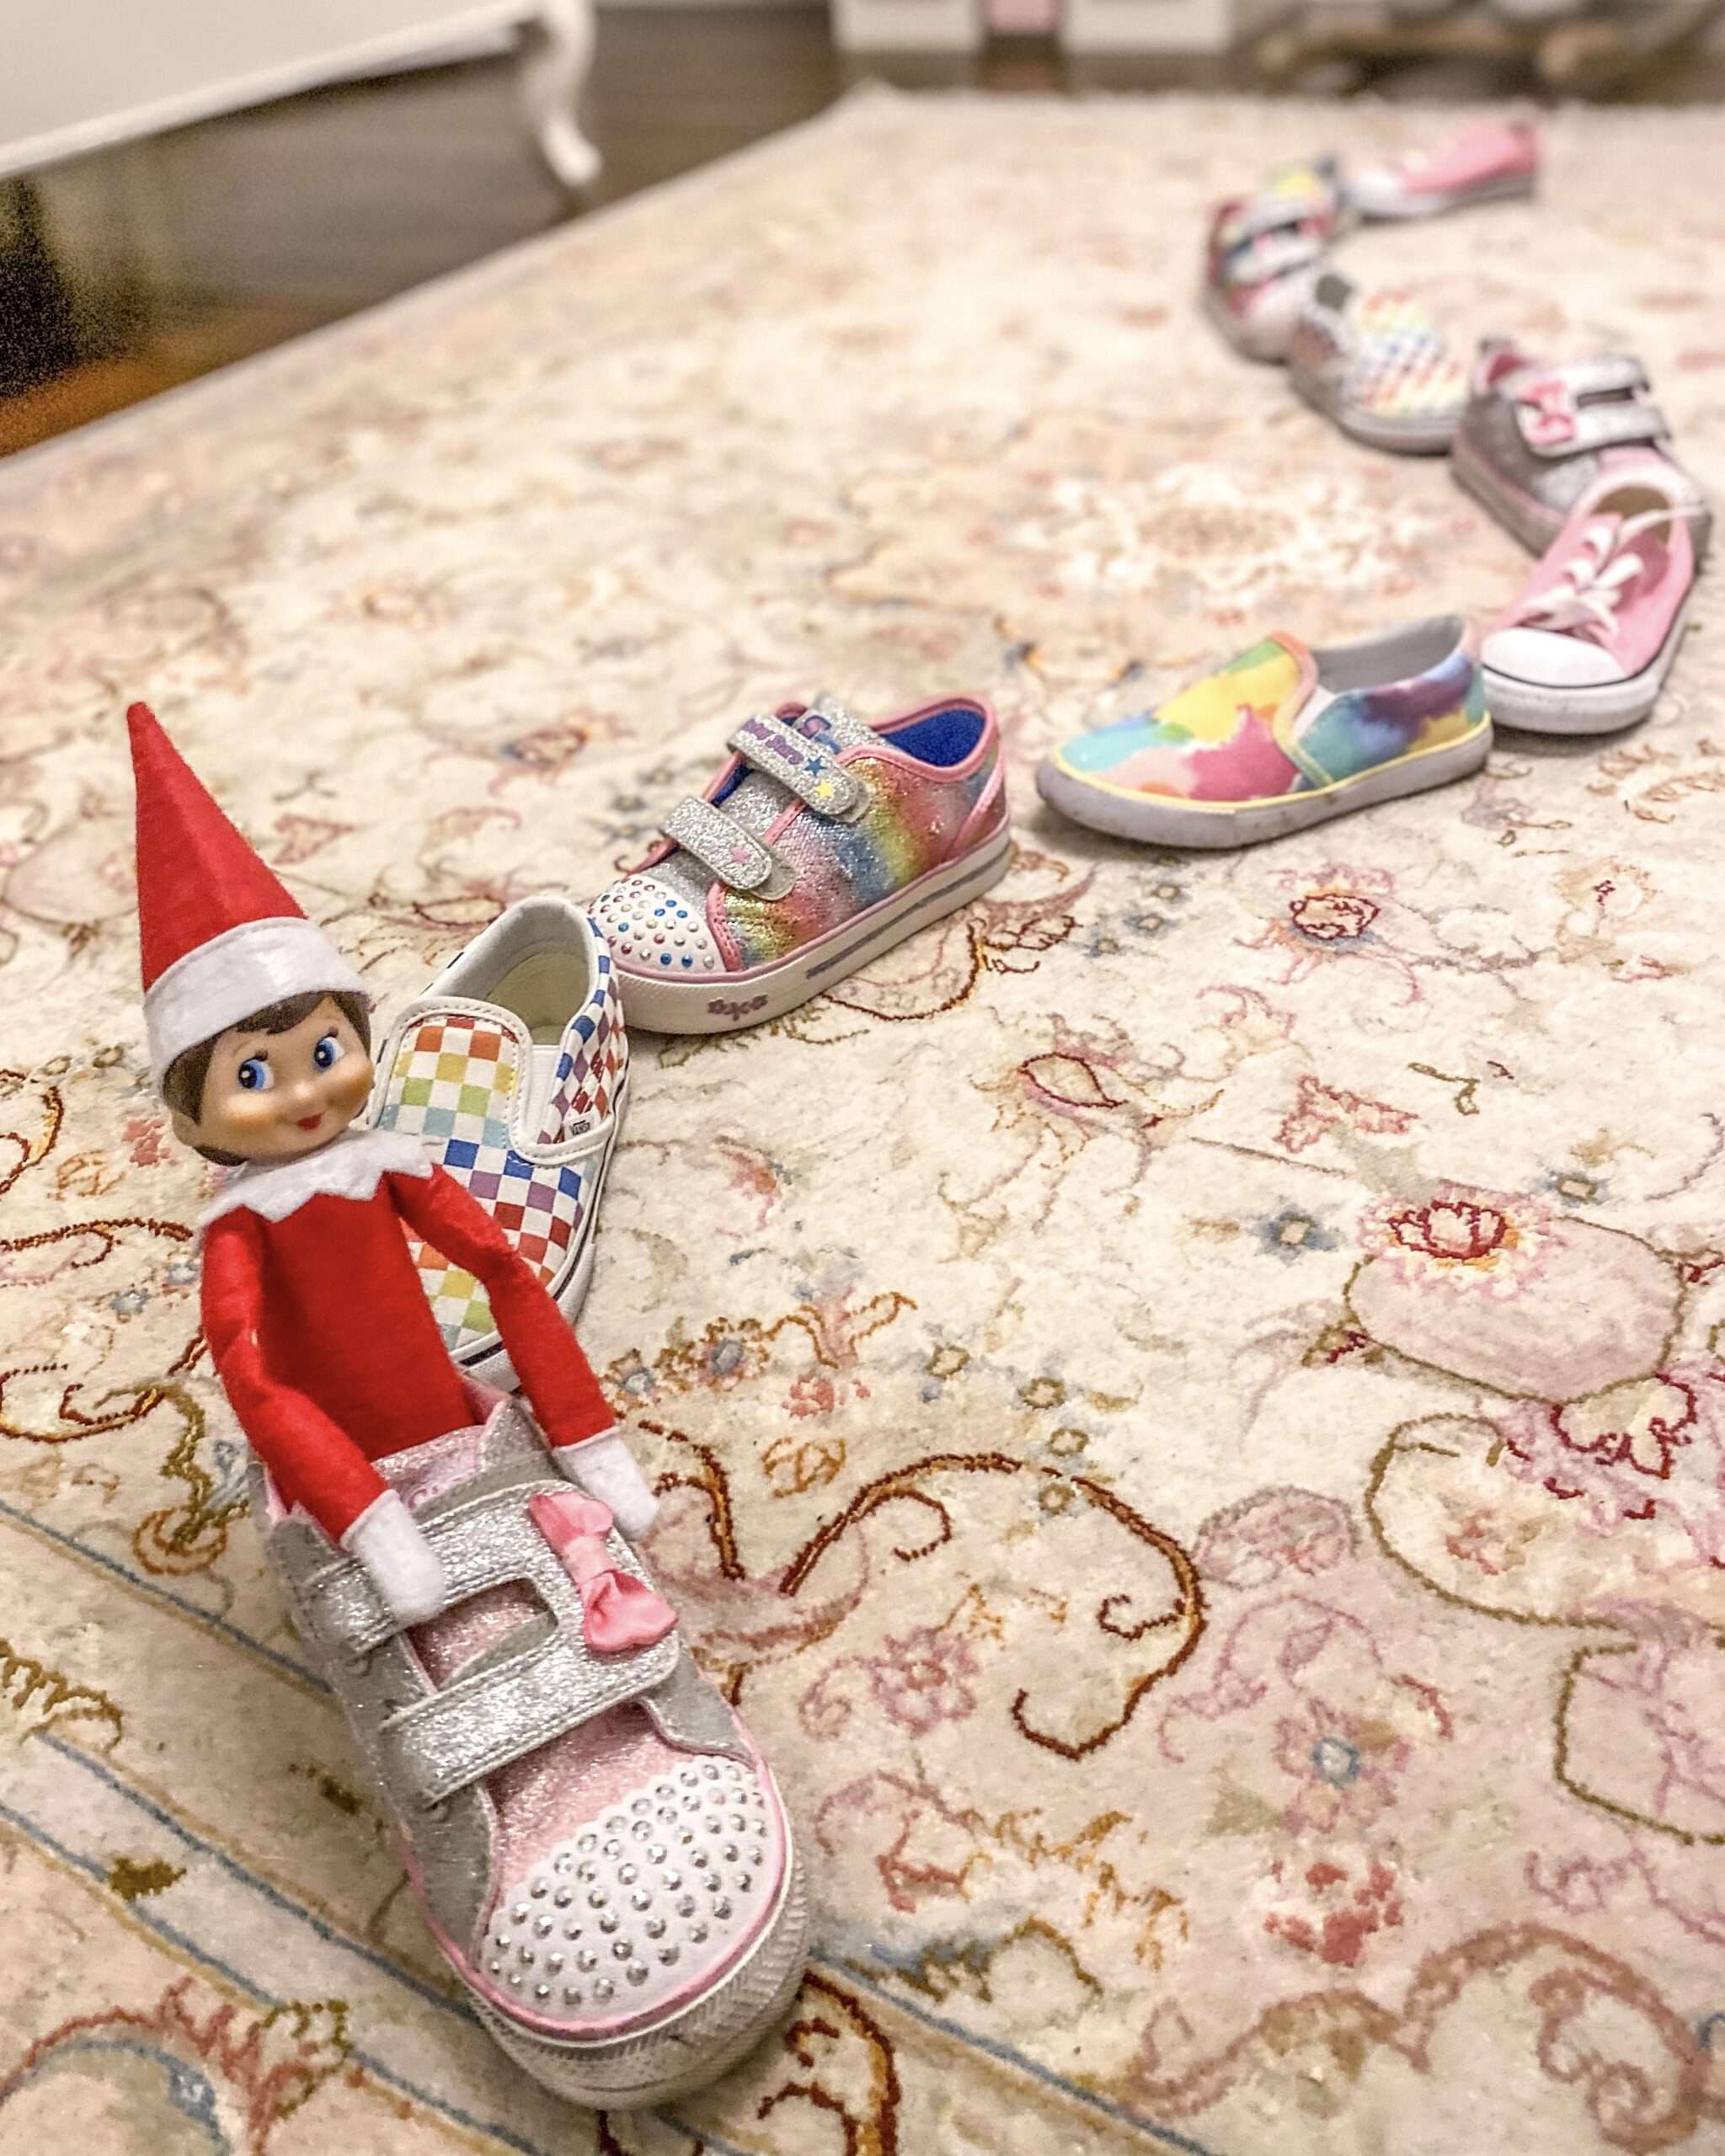 All aboard the Shoe-Shoe Train. Fun & easy Elf on the Shelf ideas for your toddler or little kid. Elf swinging on a roll of toilet paper. Quick to setup and lots of naughty and nice ideas, perfect to bring some Christmas magic to your home. #ElfOnTheShelf #ElfIdeas #ElfOnTheShelfIdeas #Christmas #ChristmasMagic